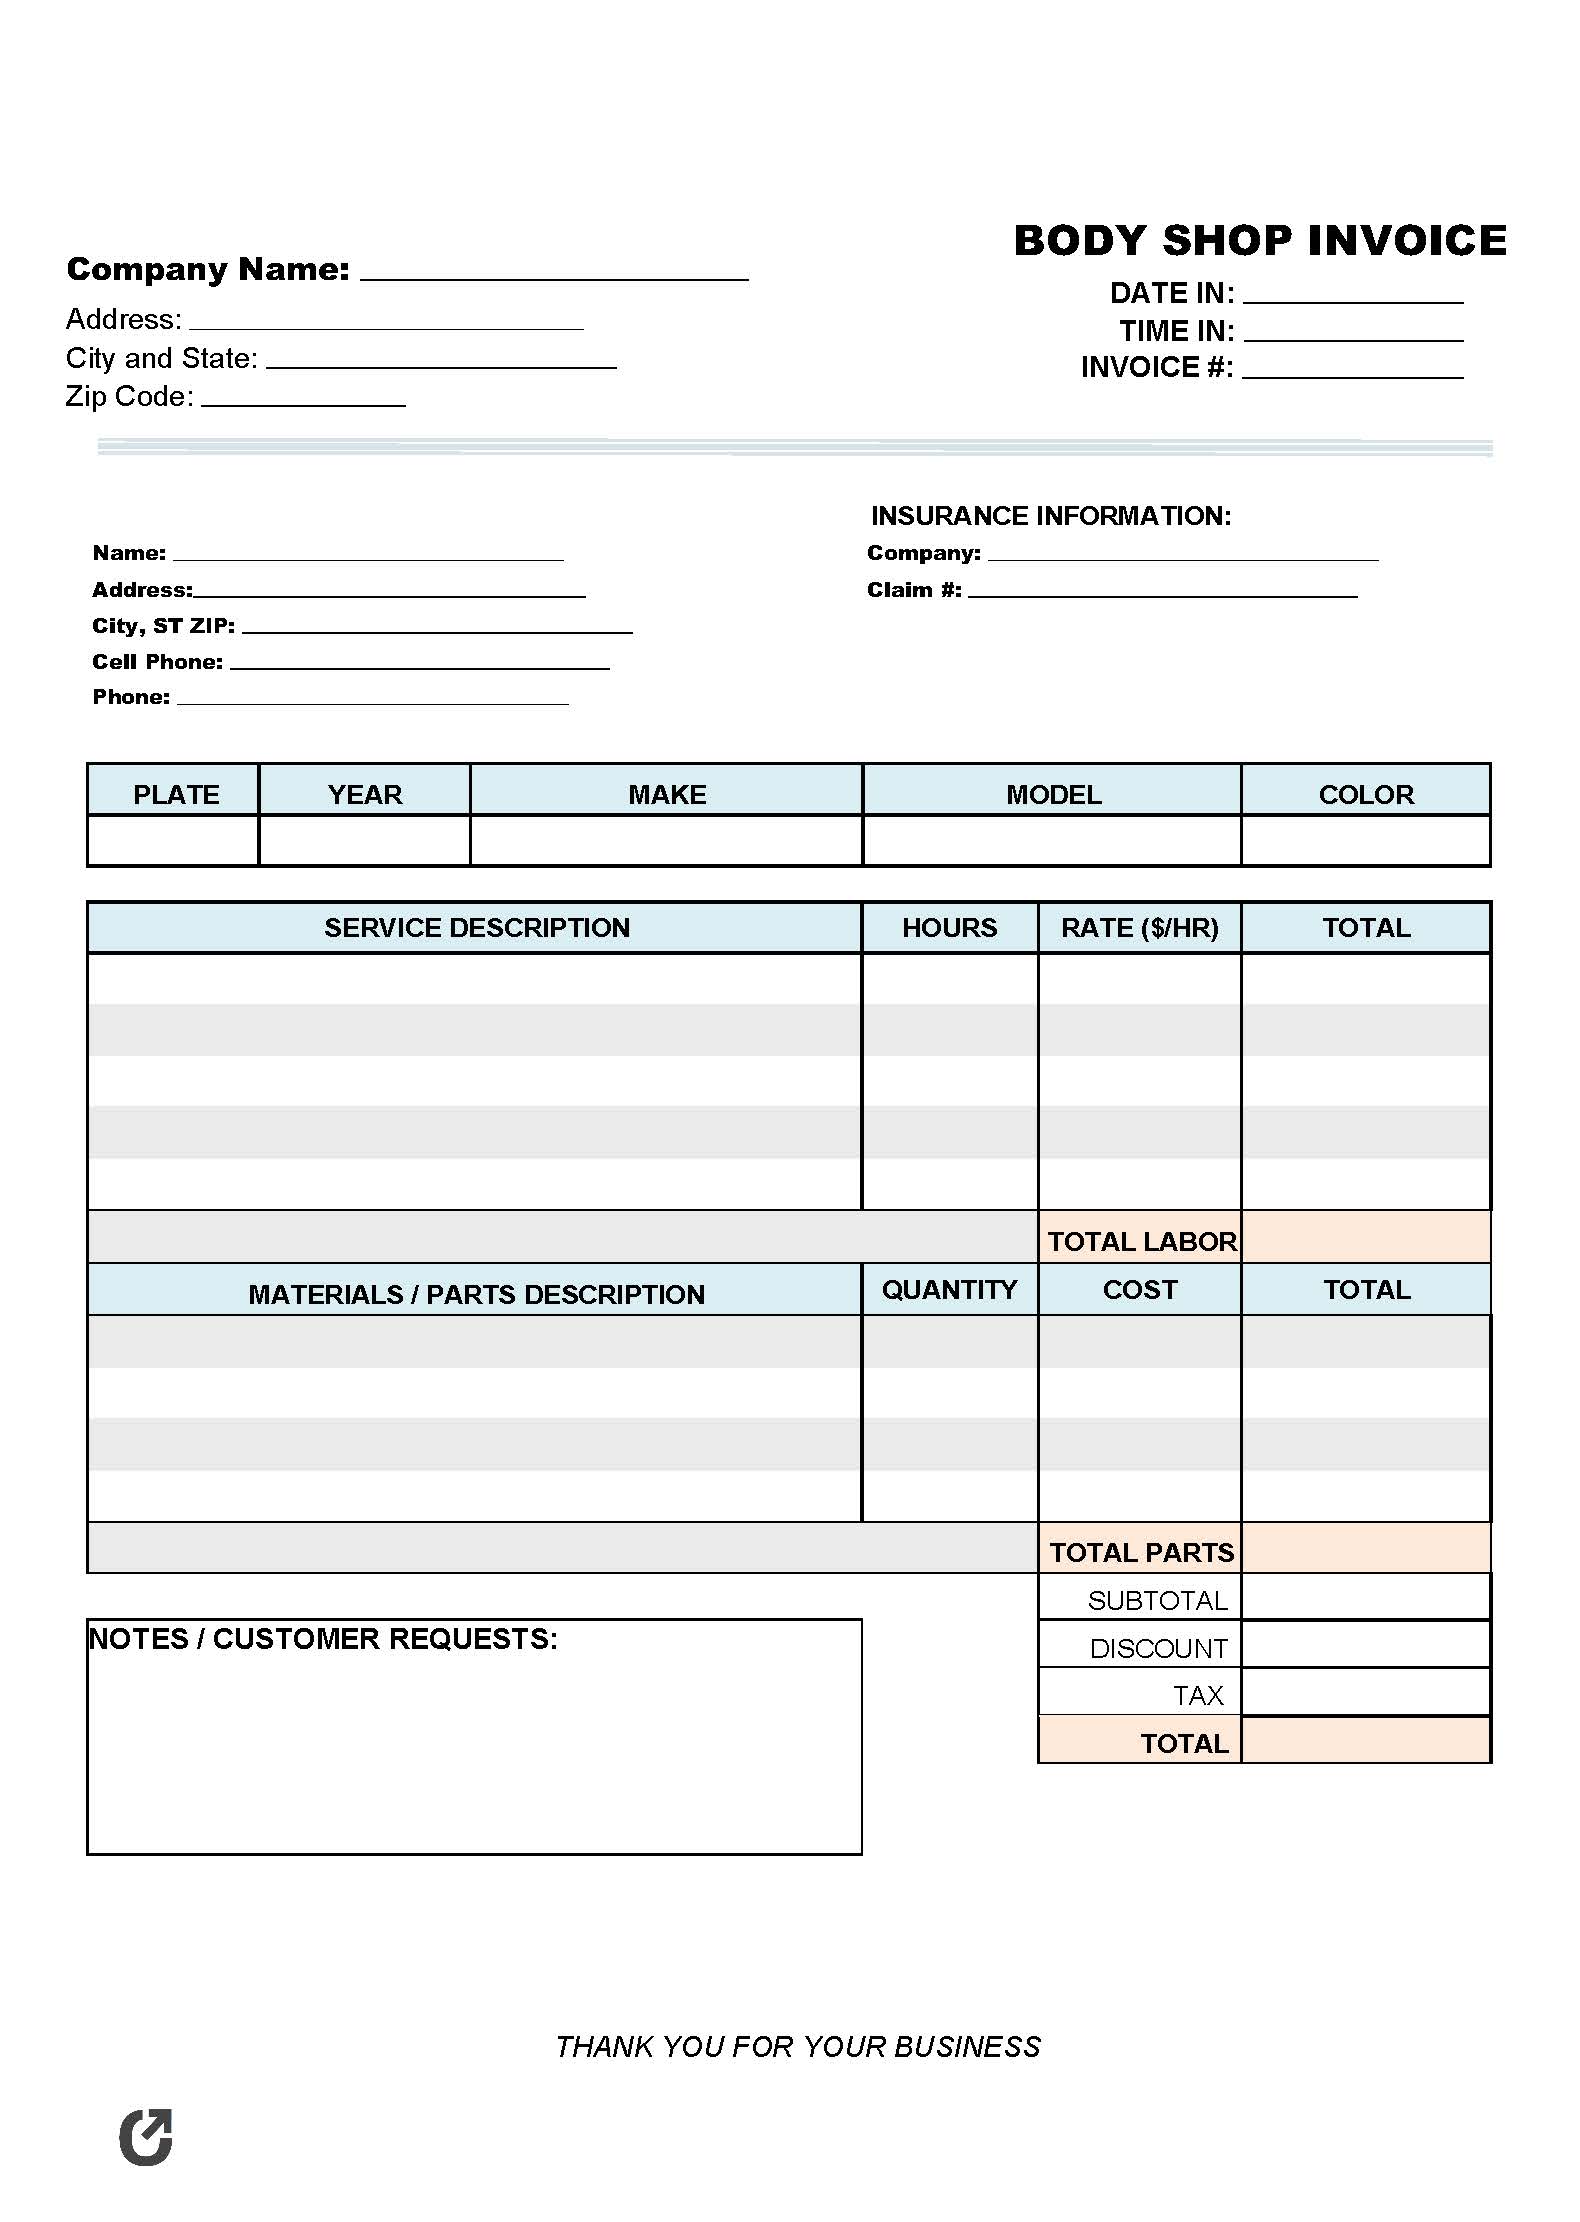 Free Body Shop Invoice Template  PDF  WORD  EXCEL In Cell Phone Repair Invoice Template